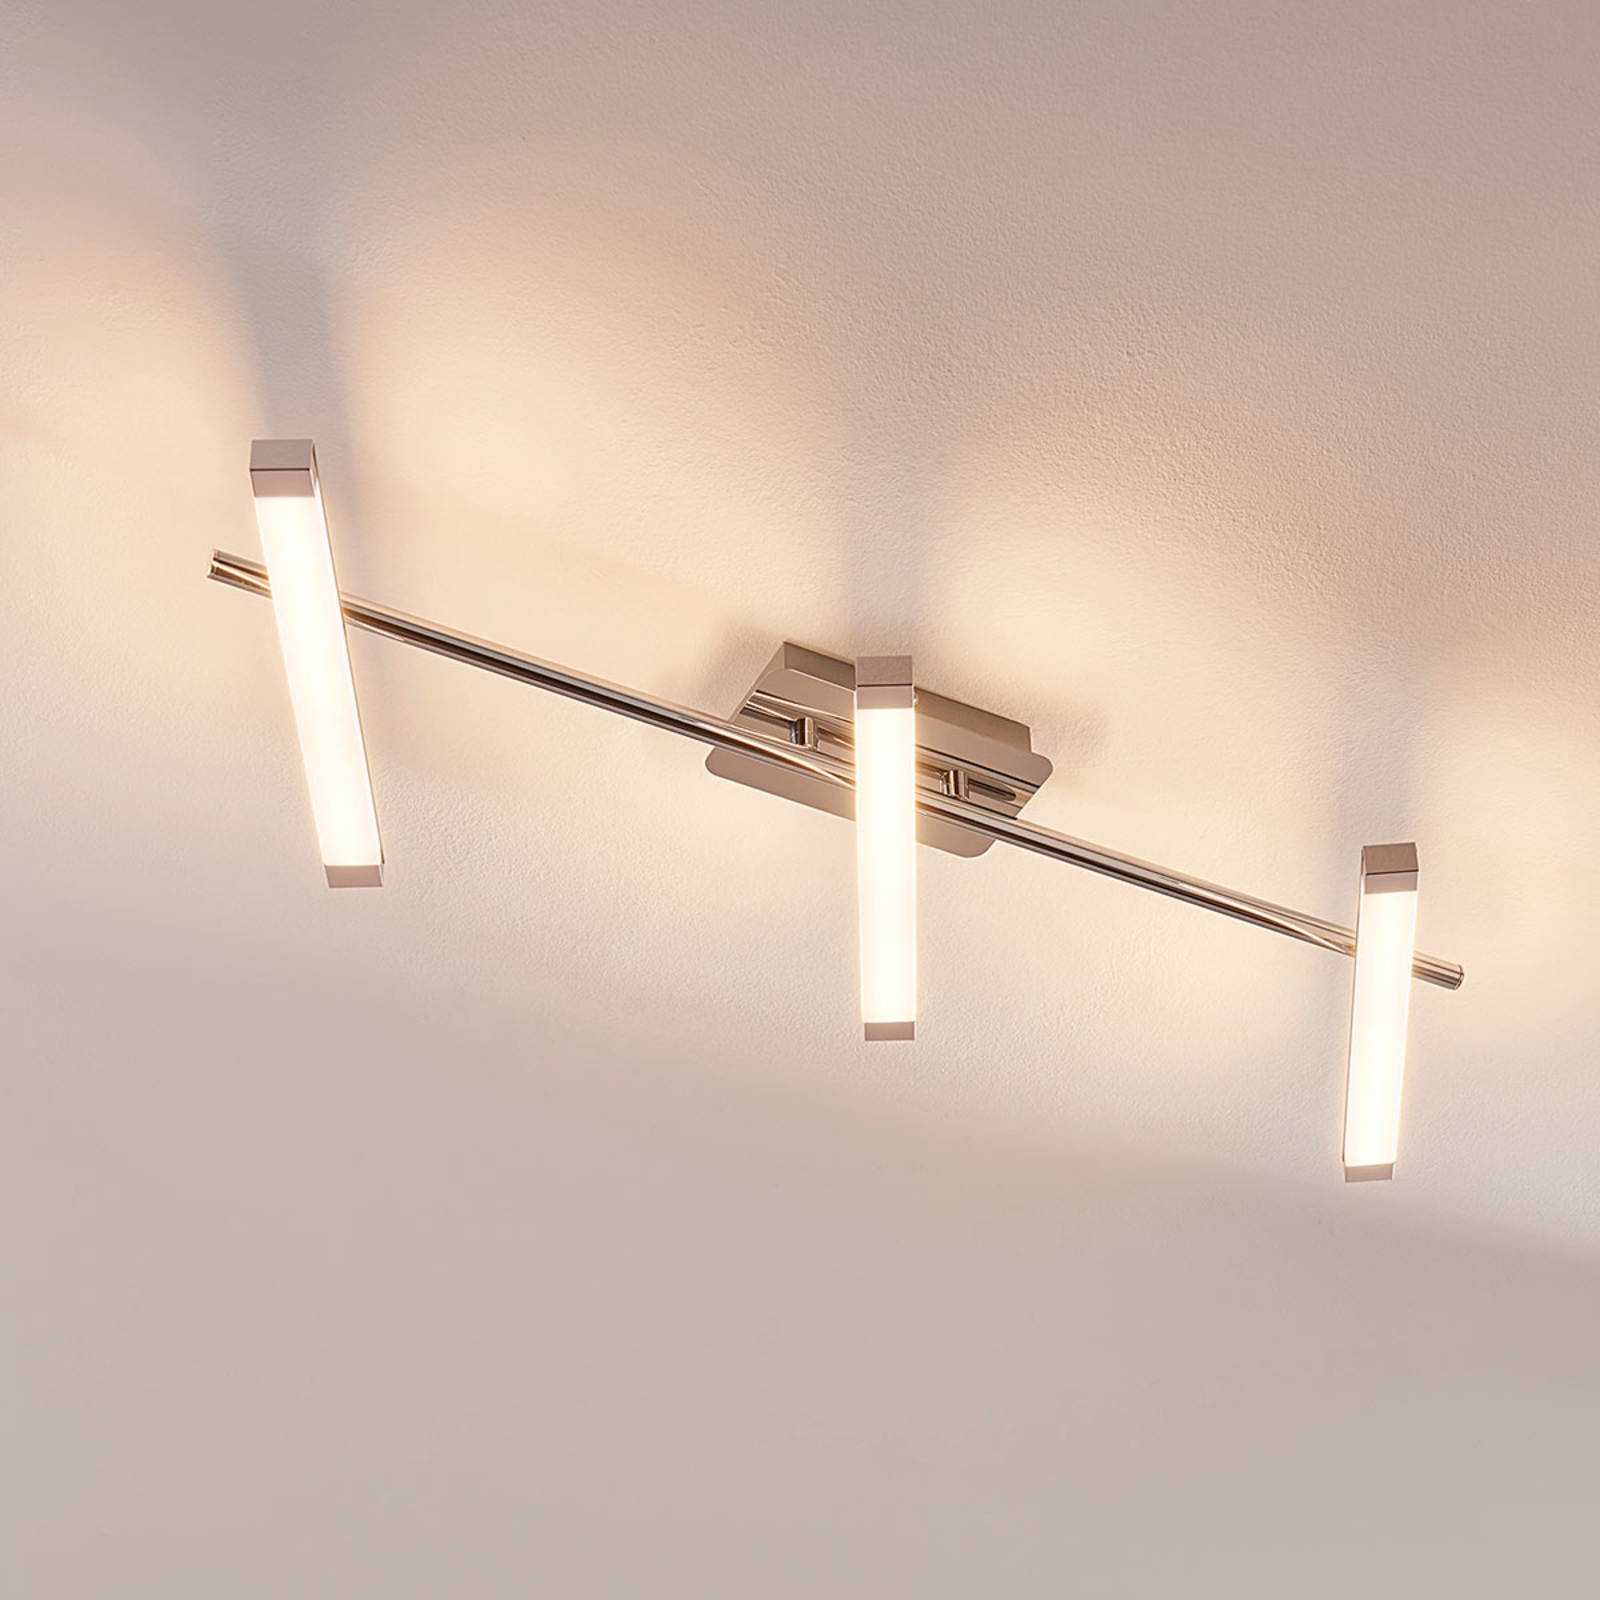 Switch-dimmable LED ceiling light Pilou